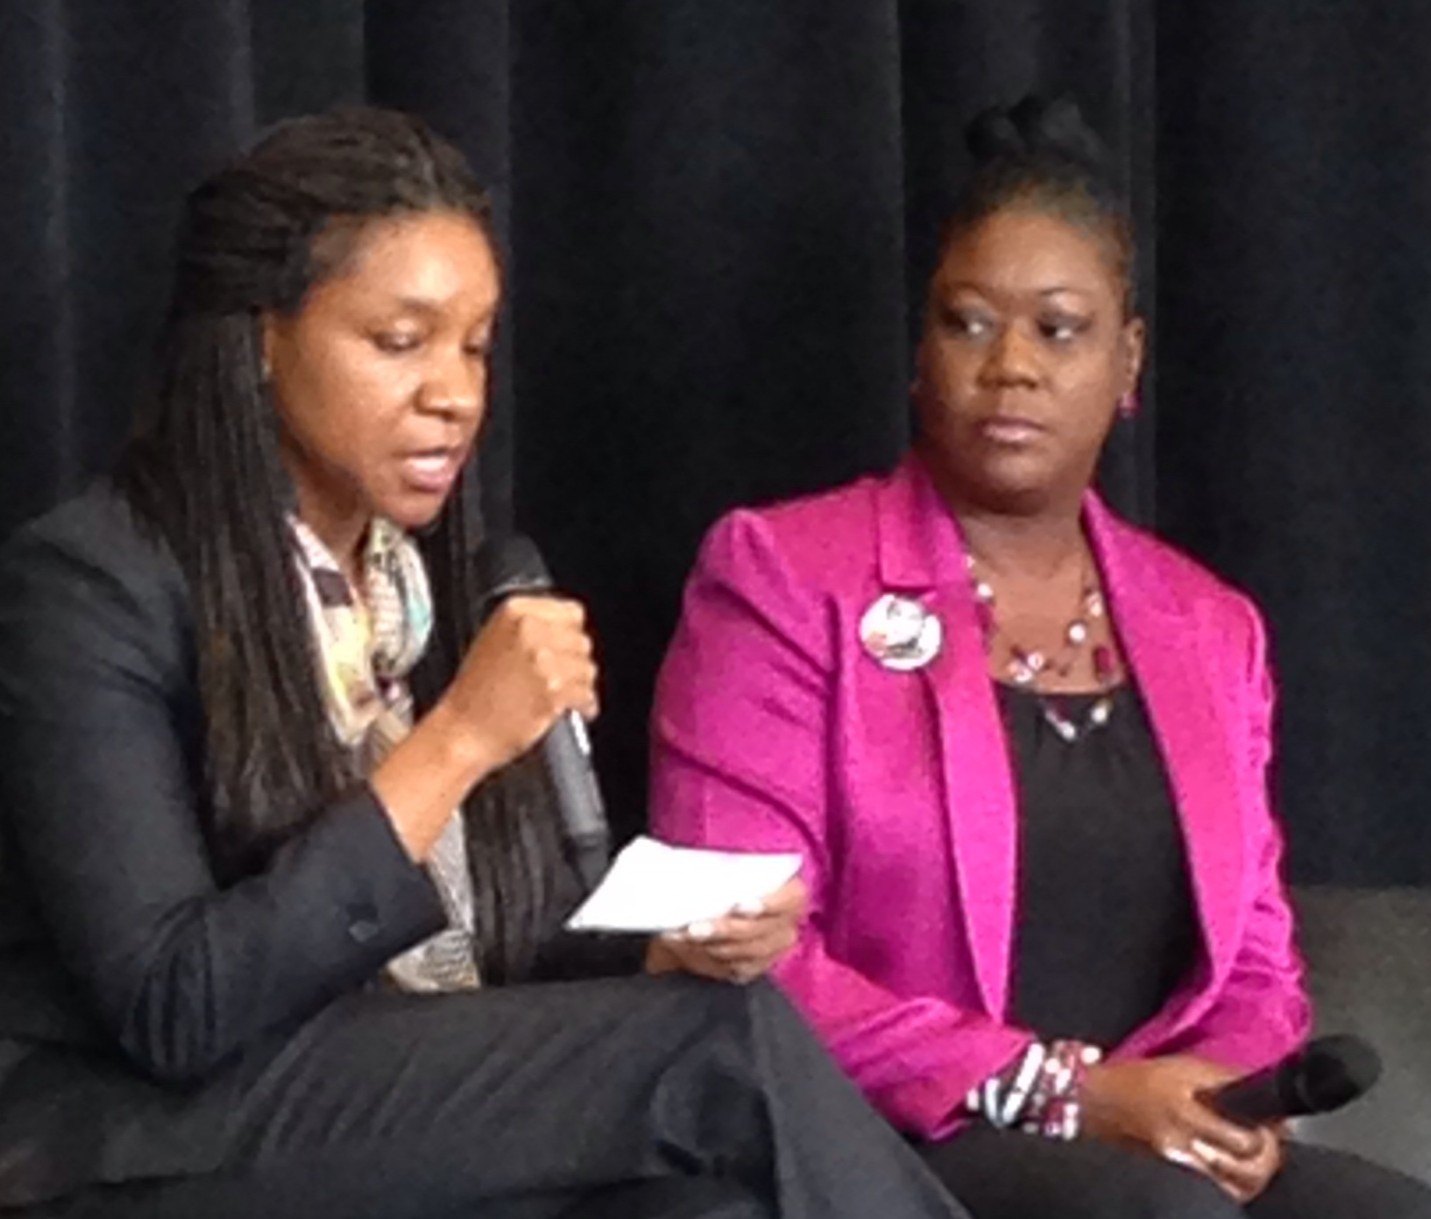 University of Utah Law Professor Erika George (L) reads questions for Sybrina Fulton (R). Fulton was the mother of Trayvon Martin, a slain Florida teenager.